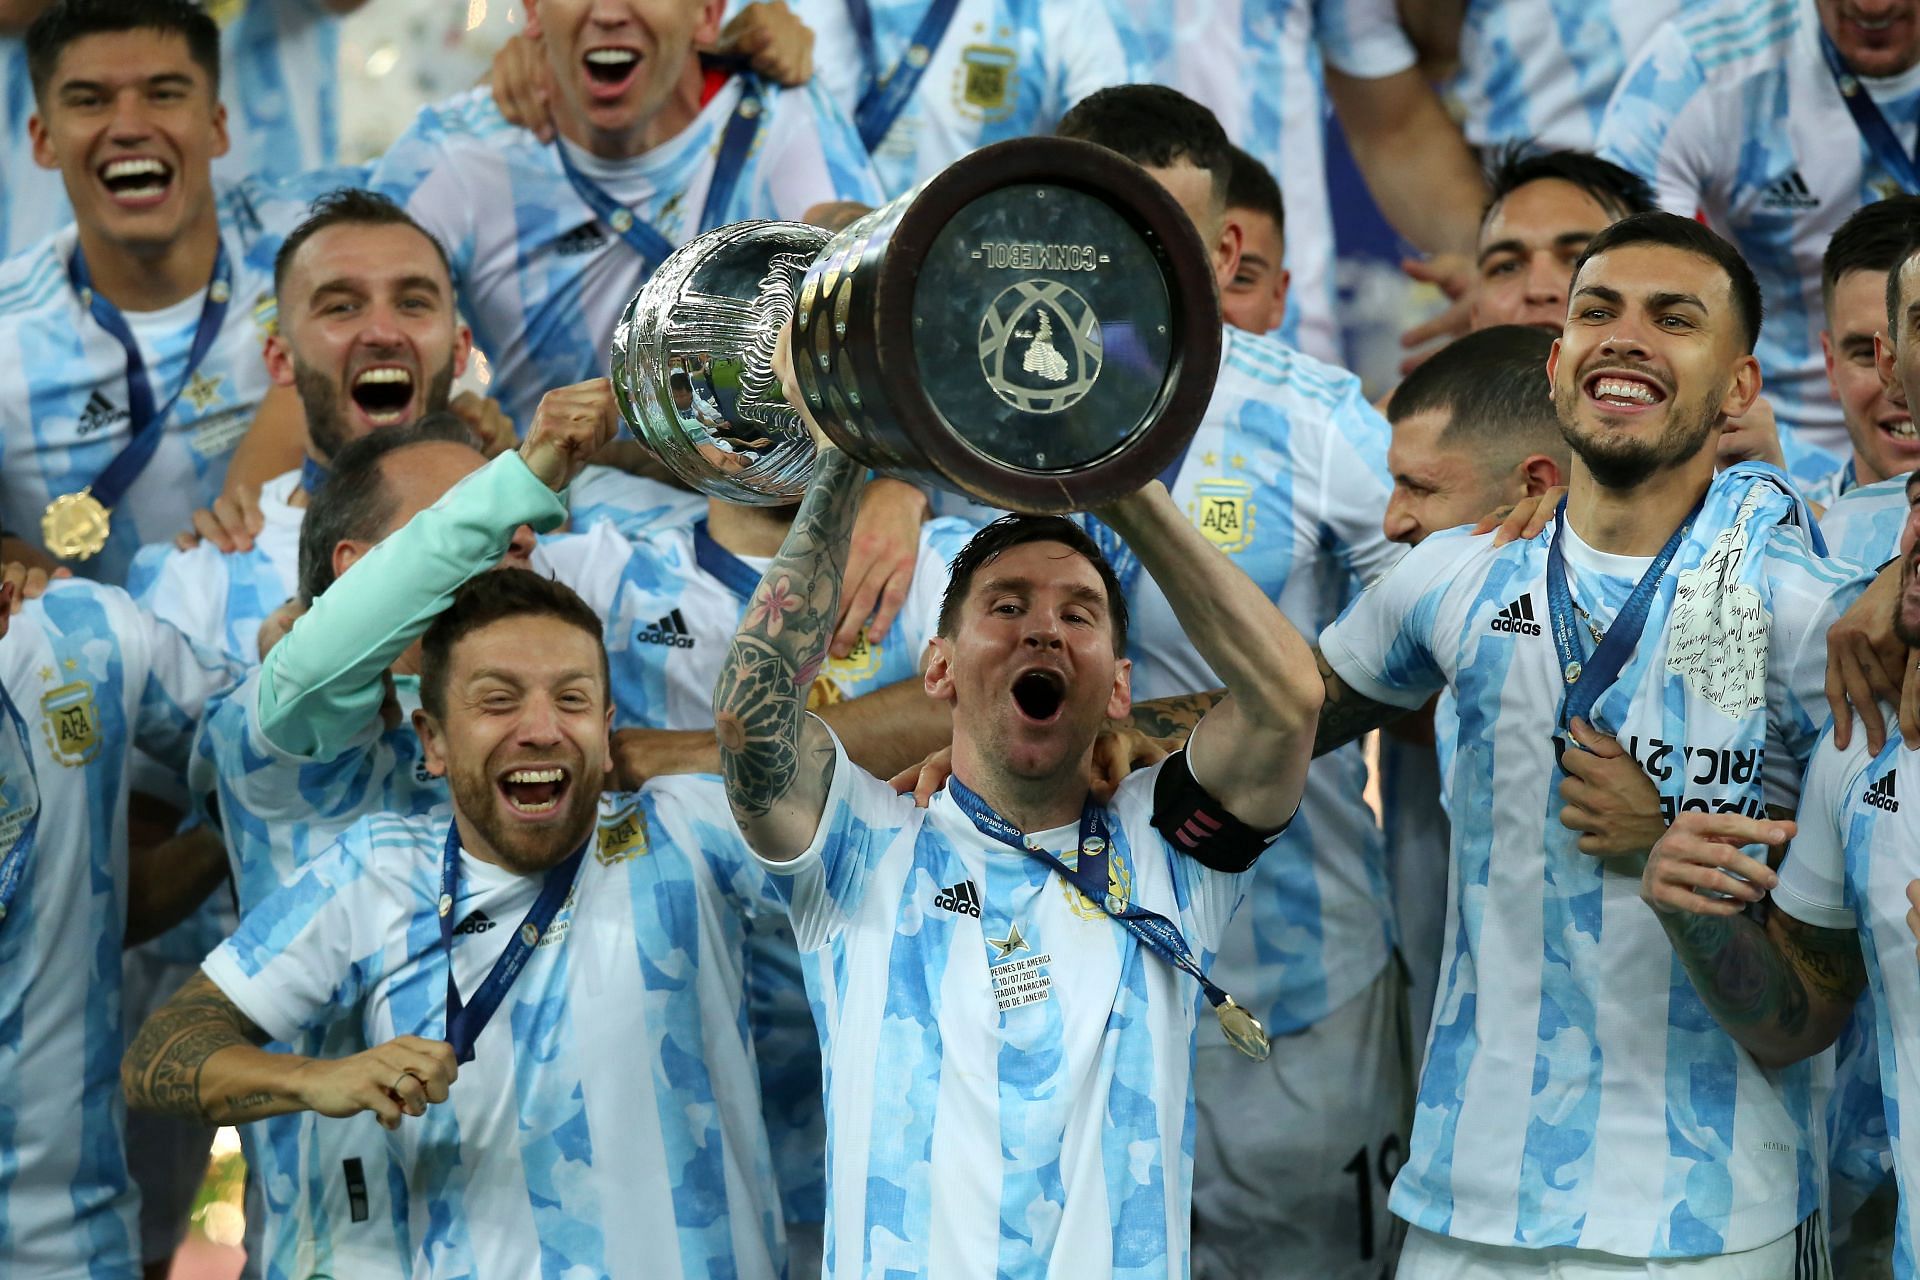 Lionel Messi won the Copa America with Argentina this summer